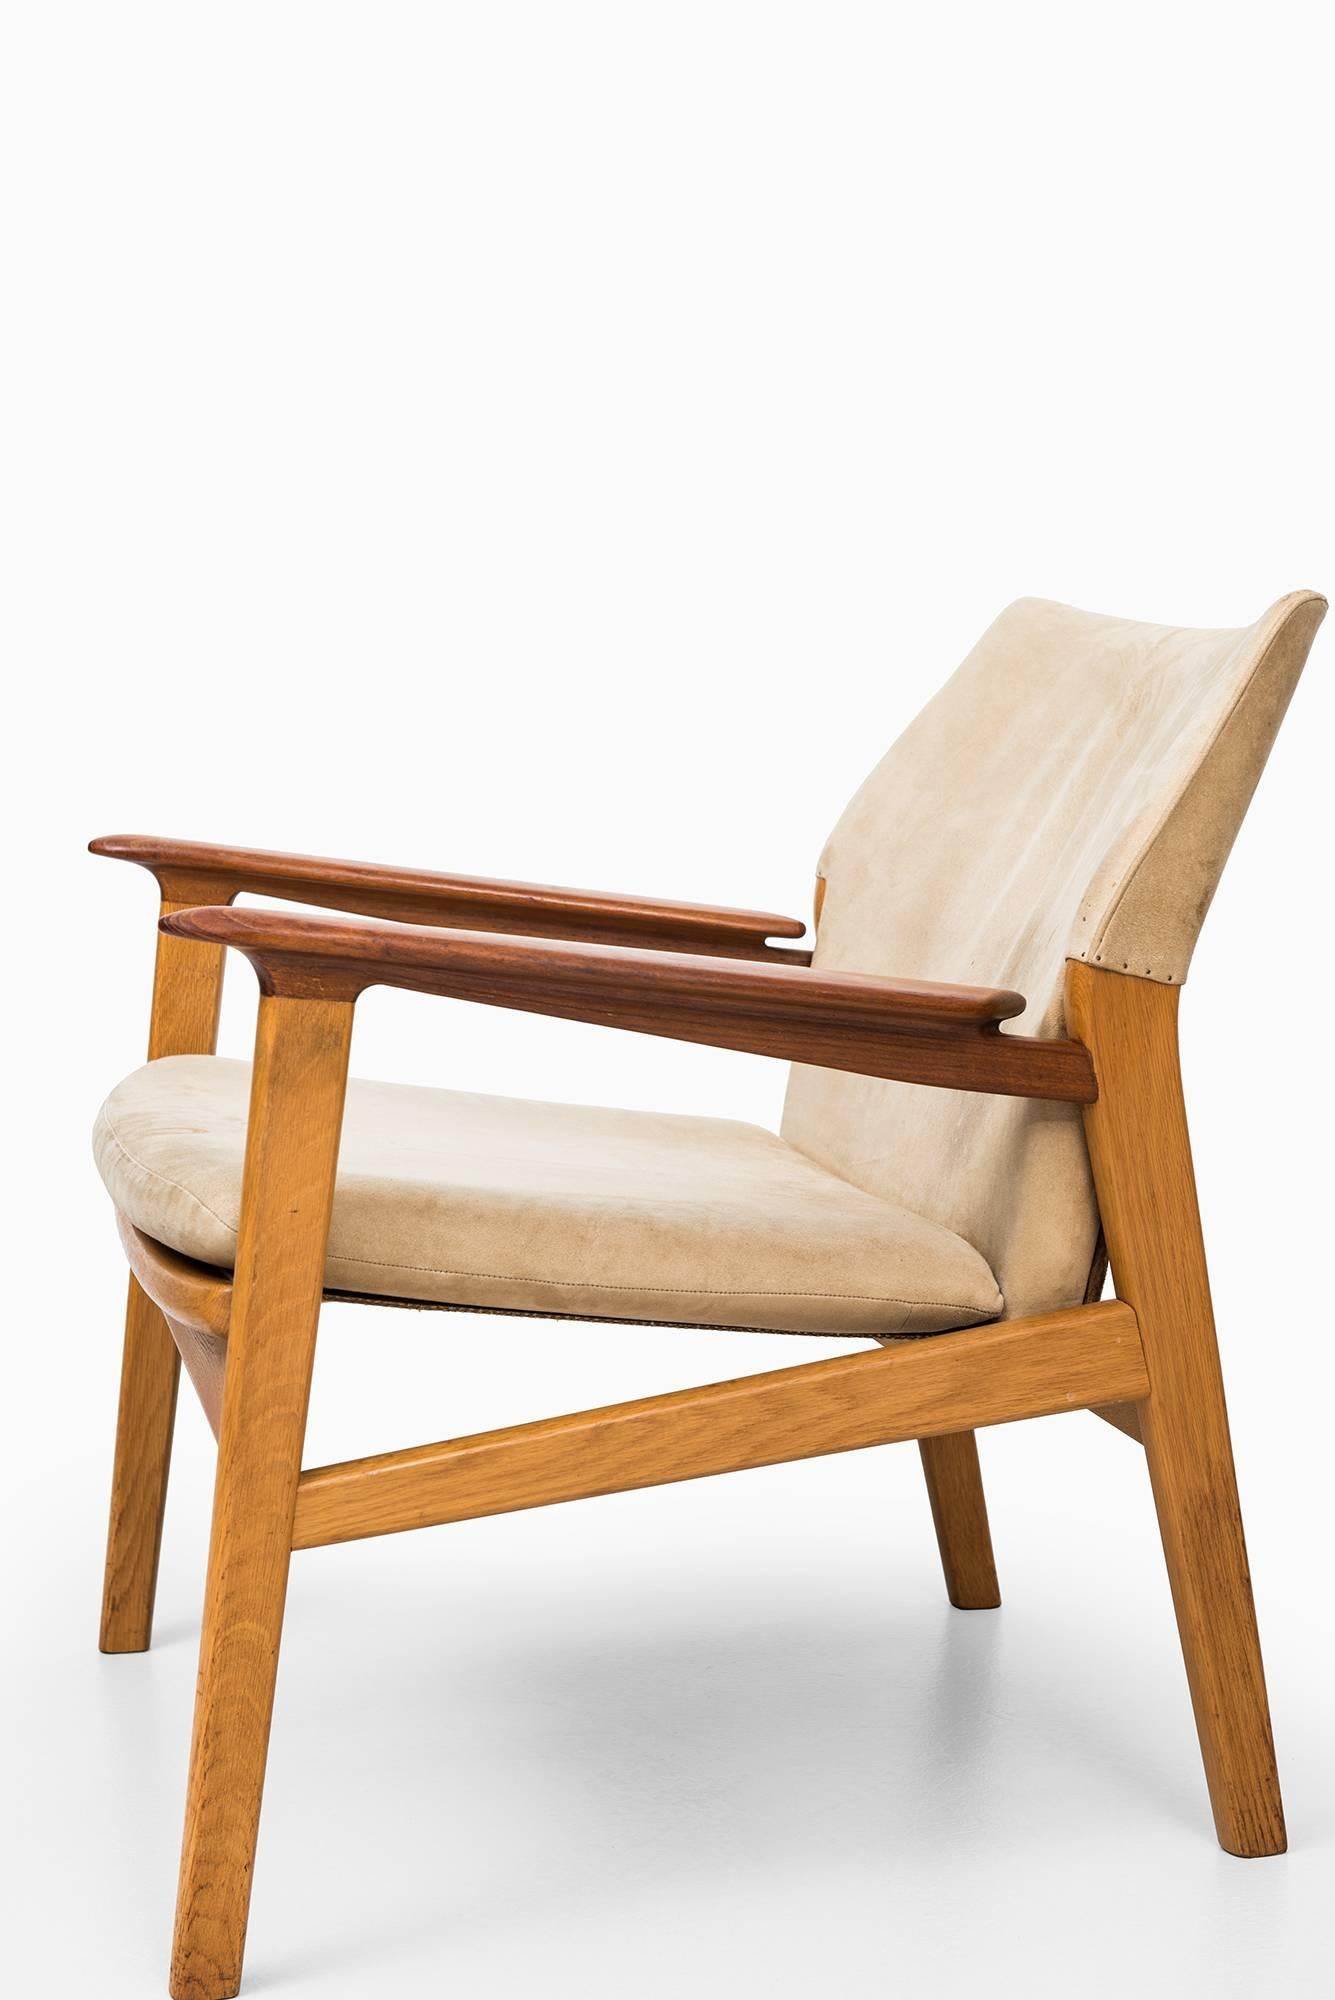 Mid-20th Century Hans Olsen Easy Chairs Model 9015 by Gärsnäs in Sweden